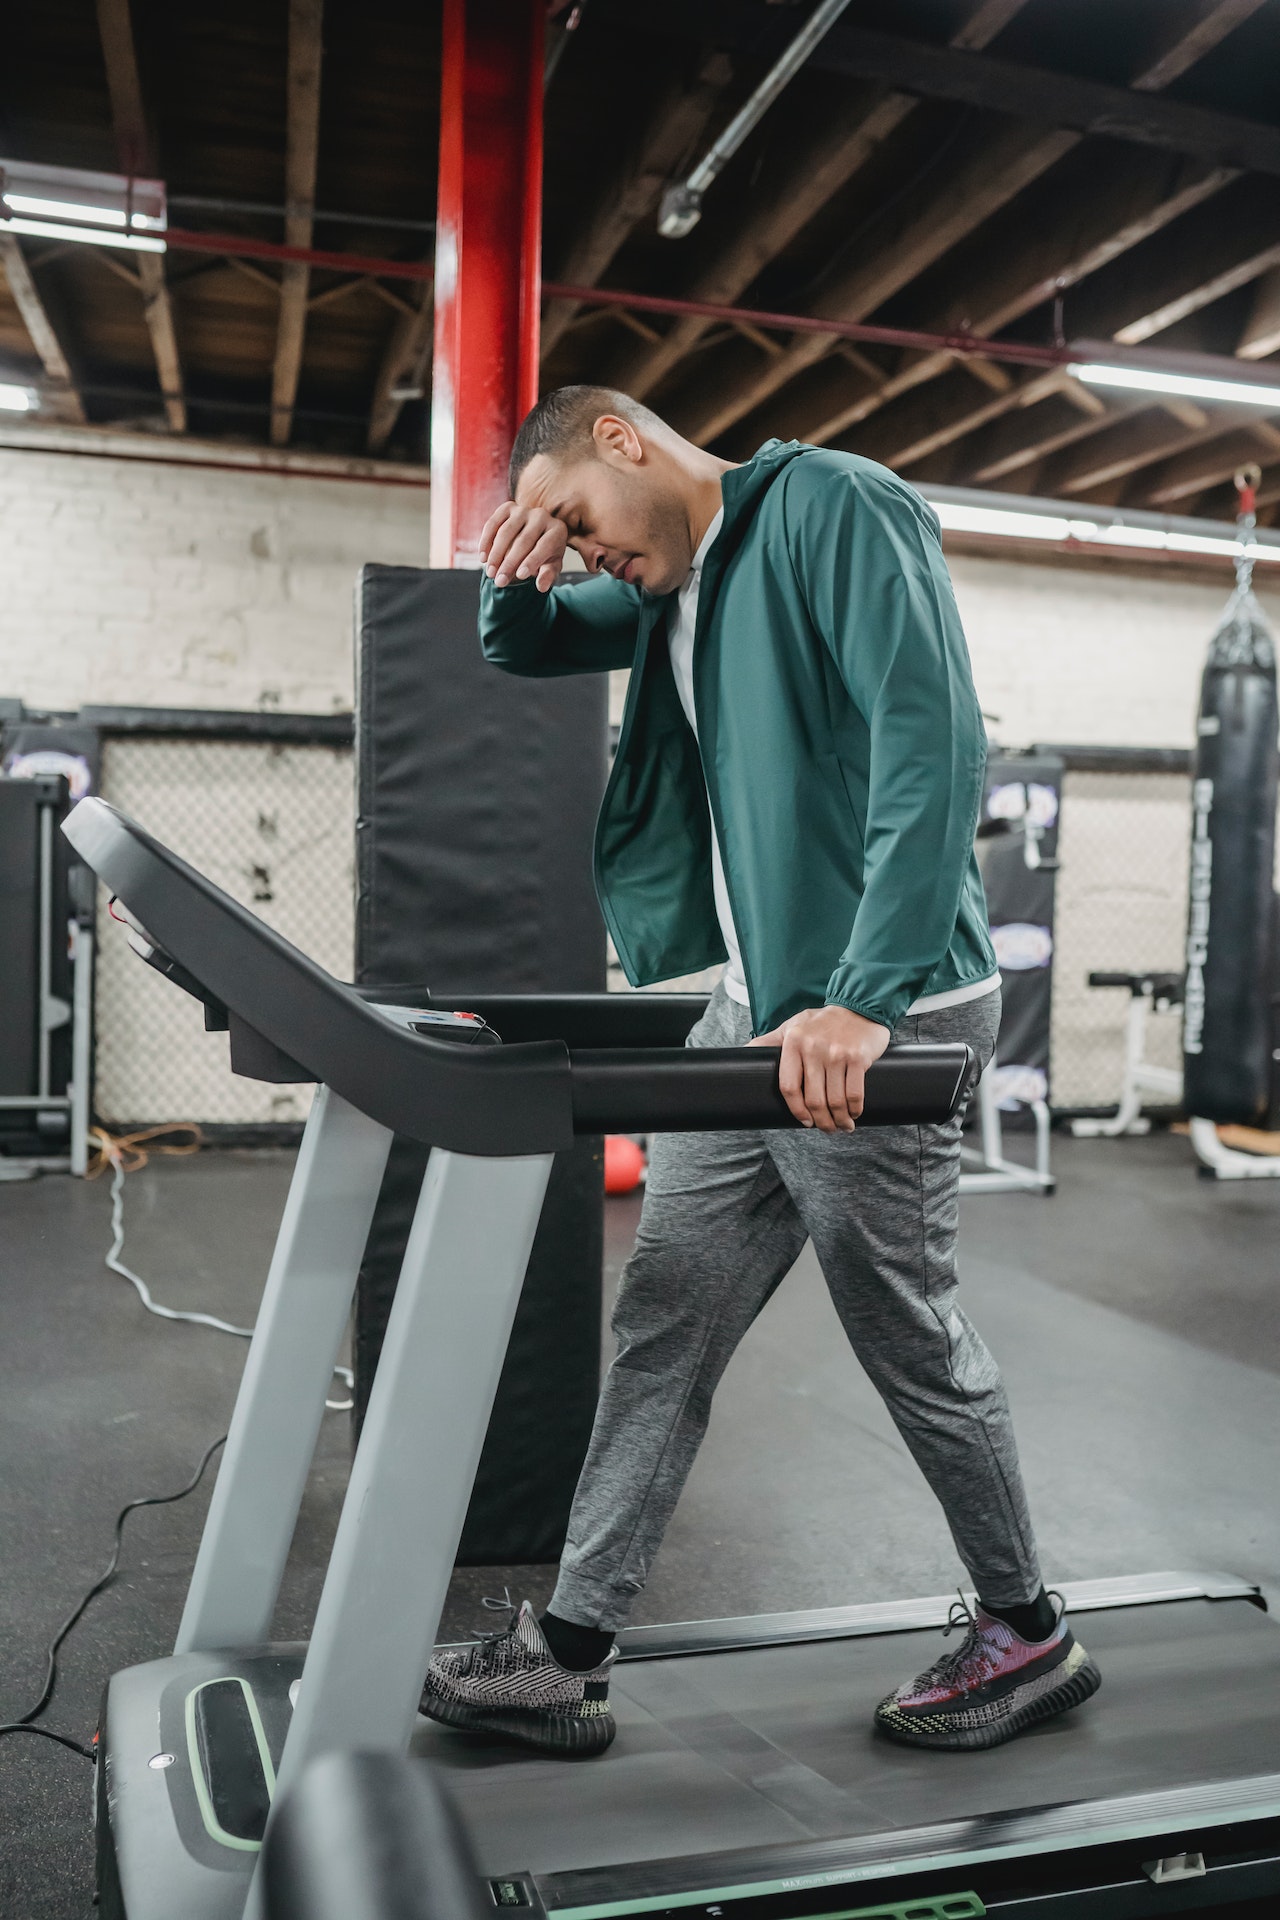 A man wearing a green jacket, white shirt, and gray pants is using the treadmill